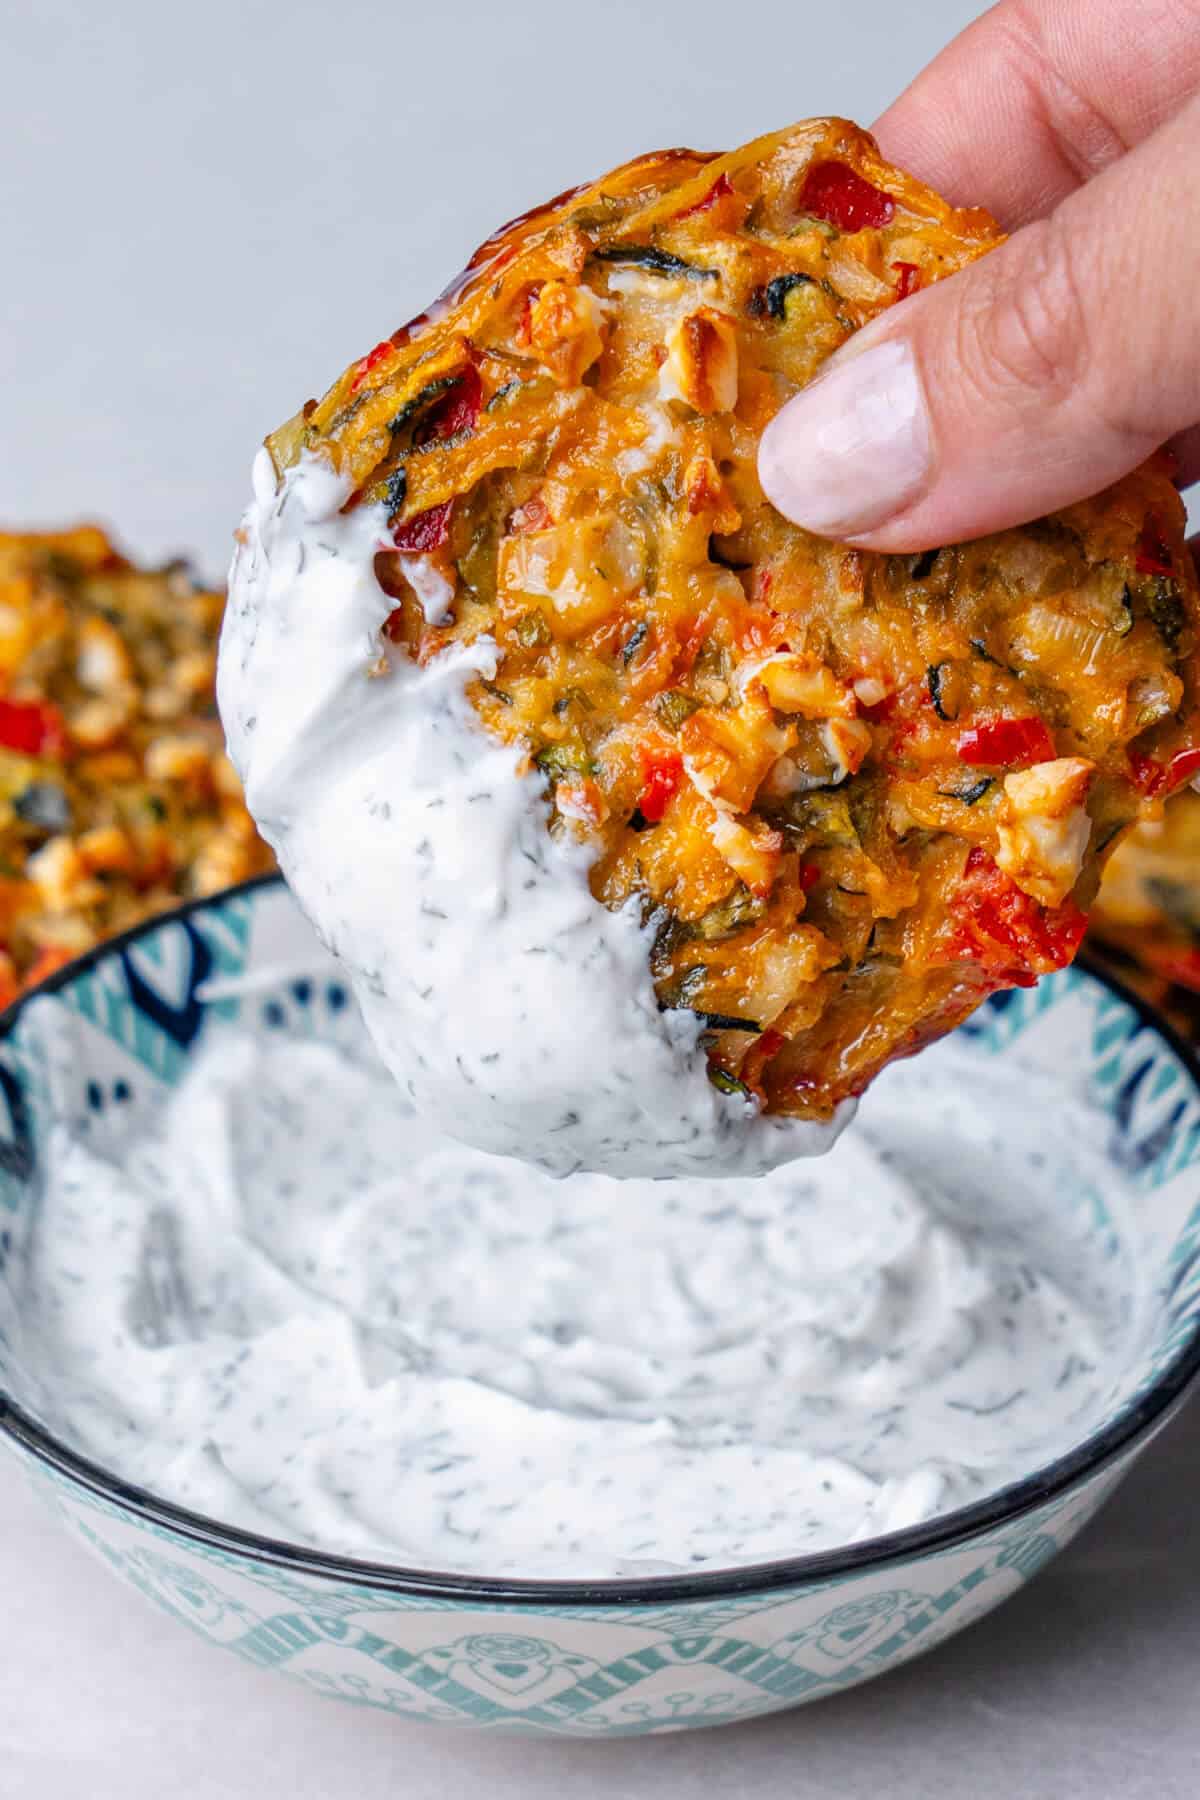 A vegetable fritter dipped into a yoghurt sauce